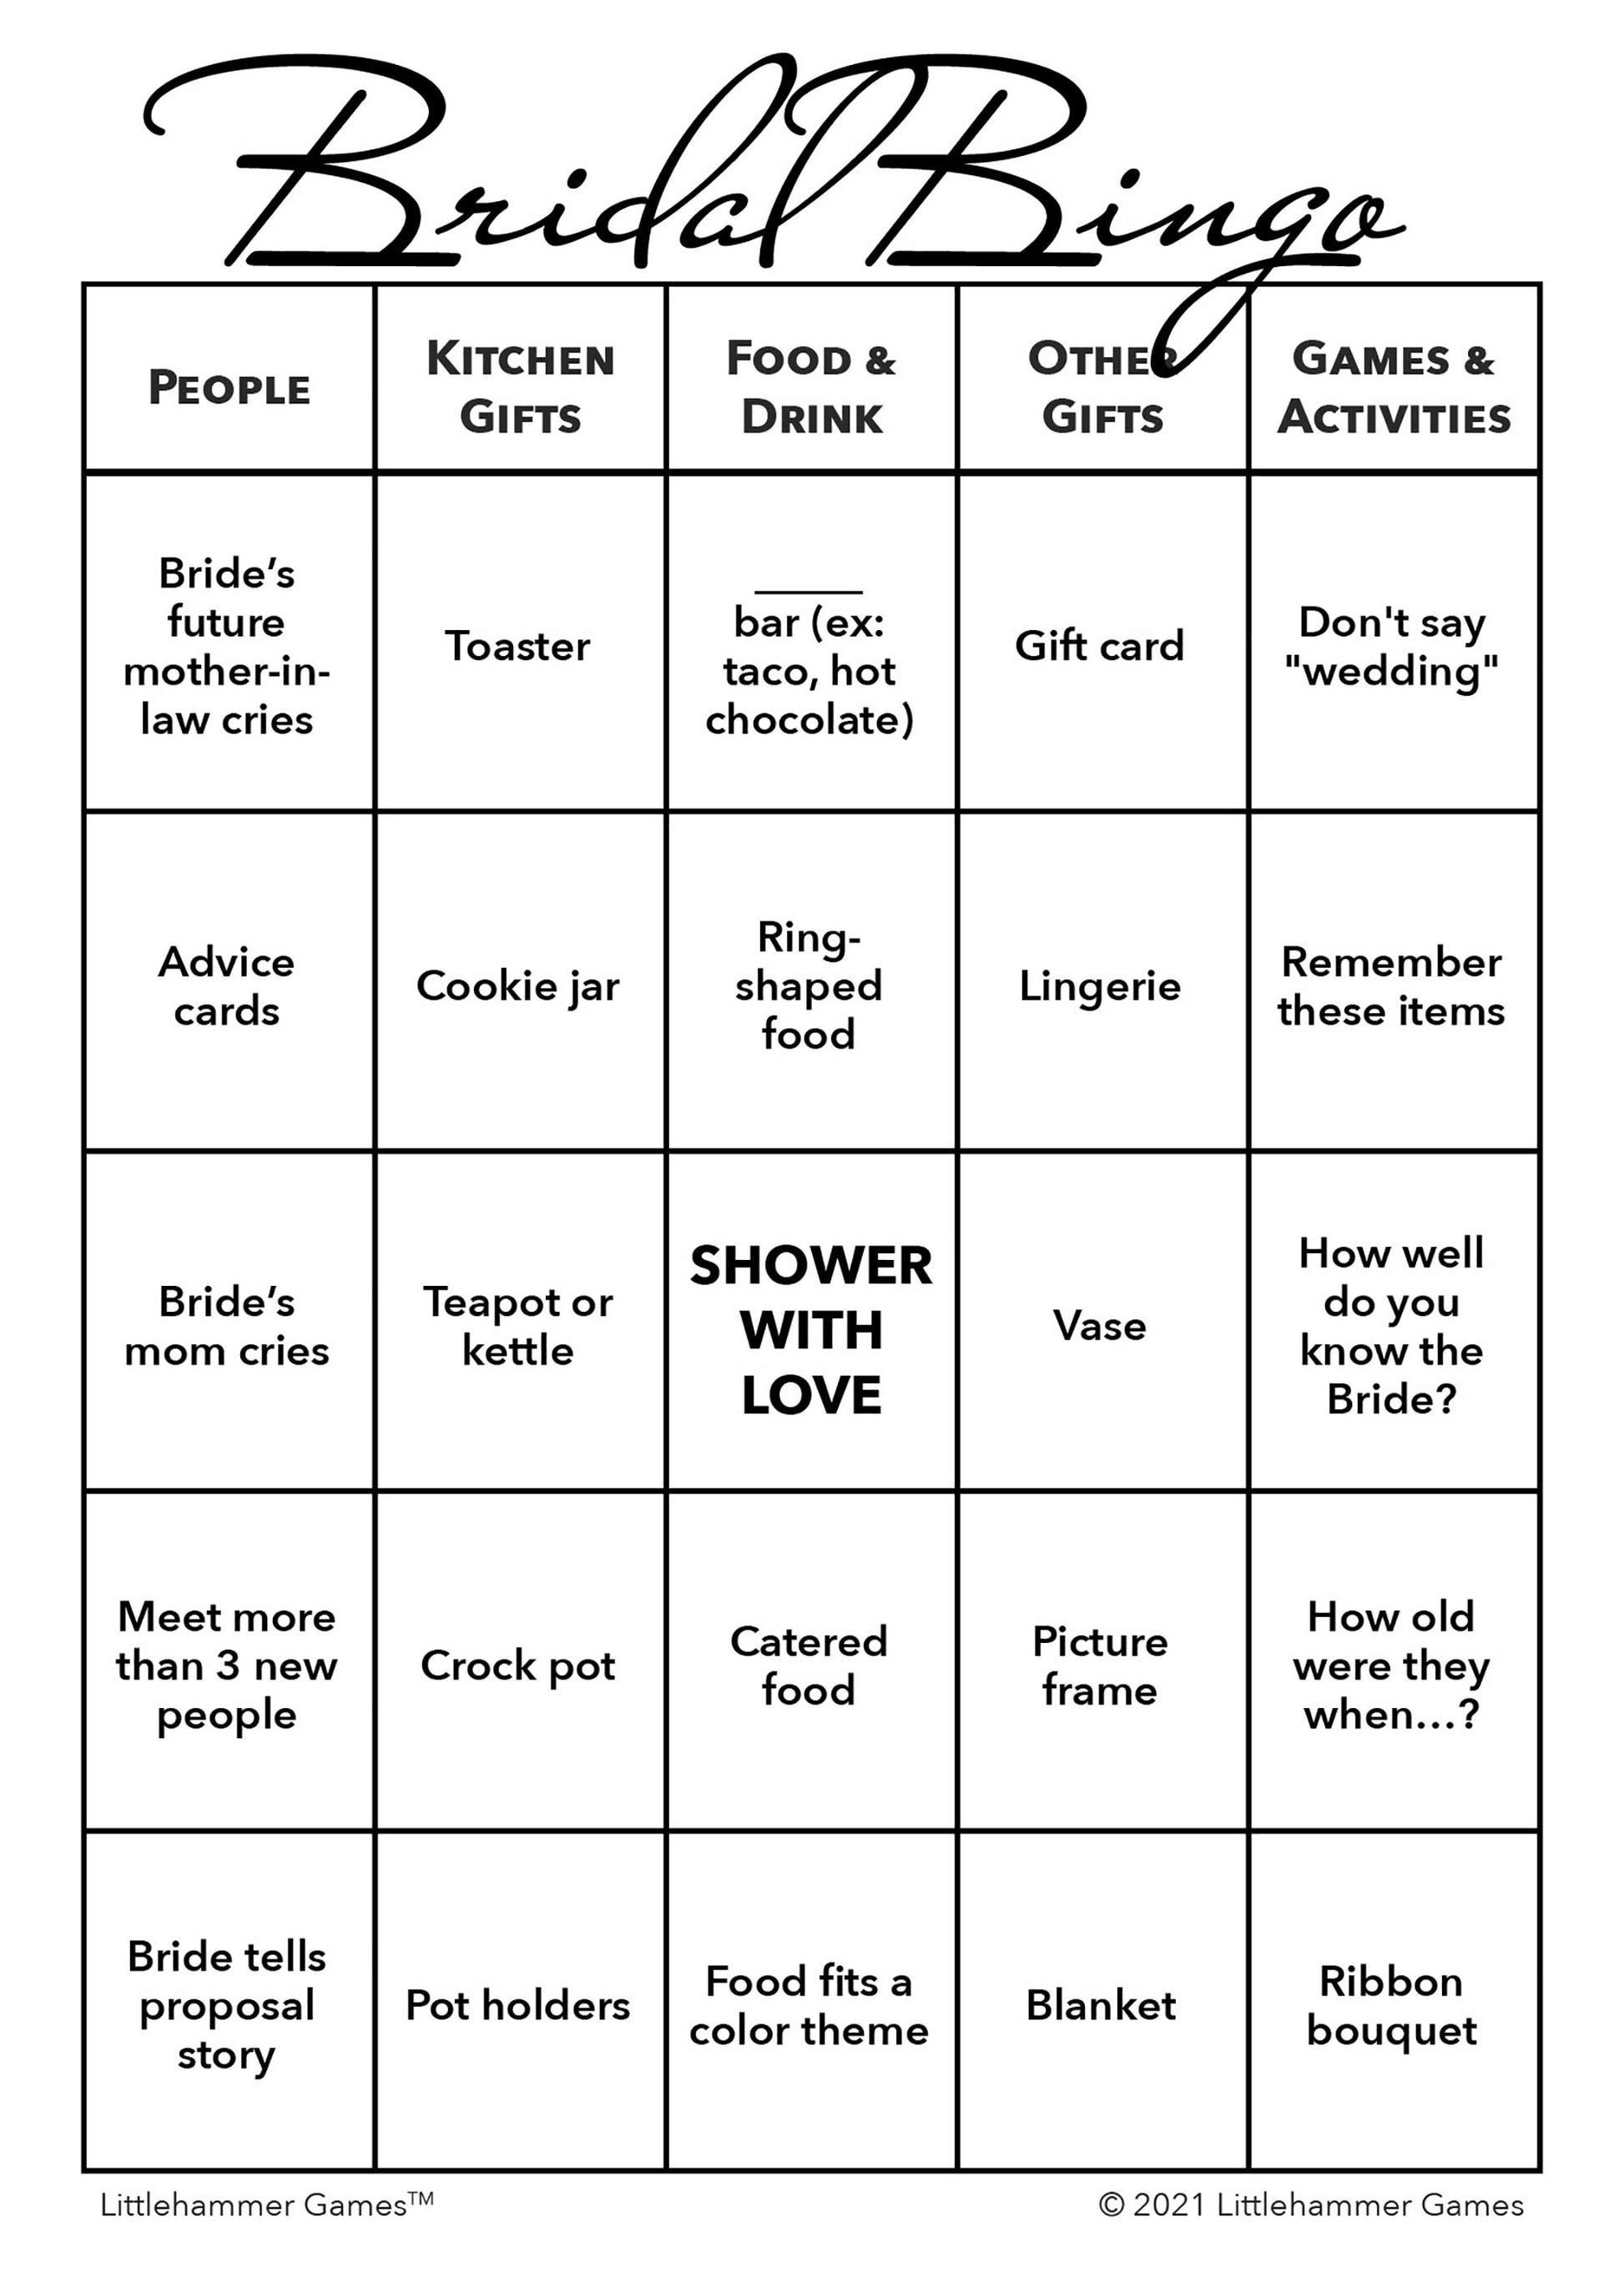 Bridal Bingo game card with black text on a white background